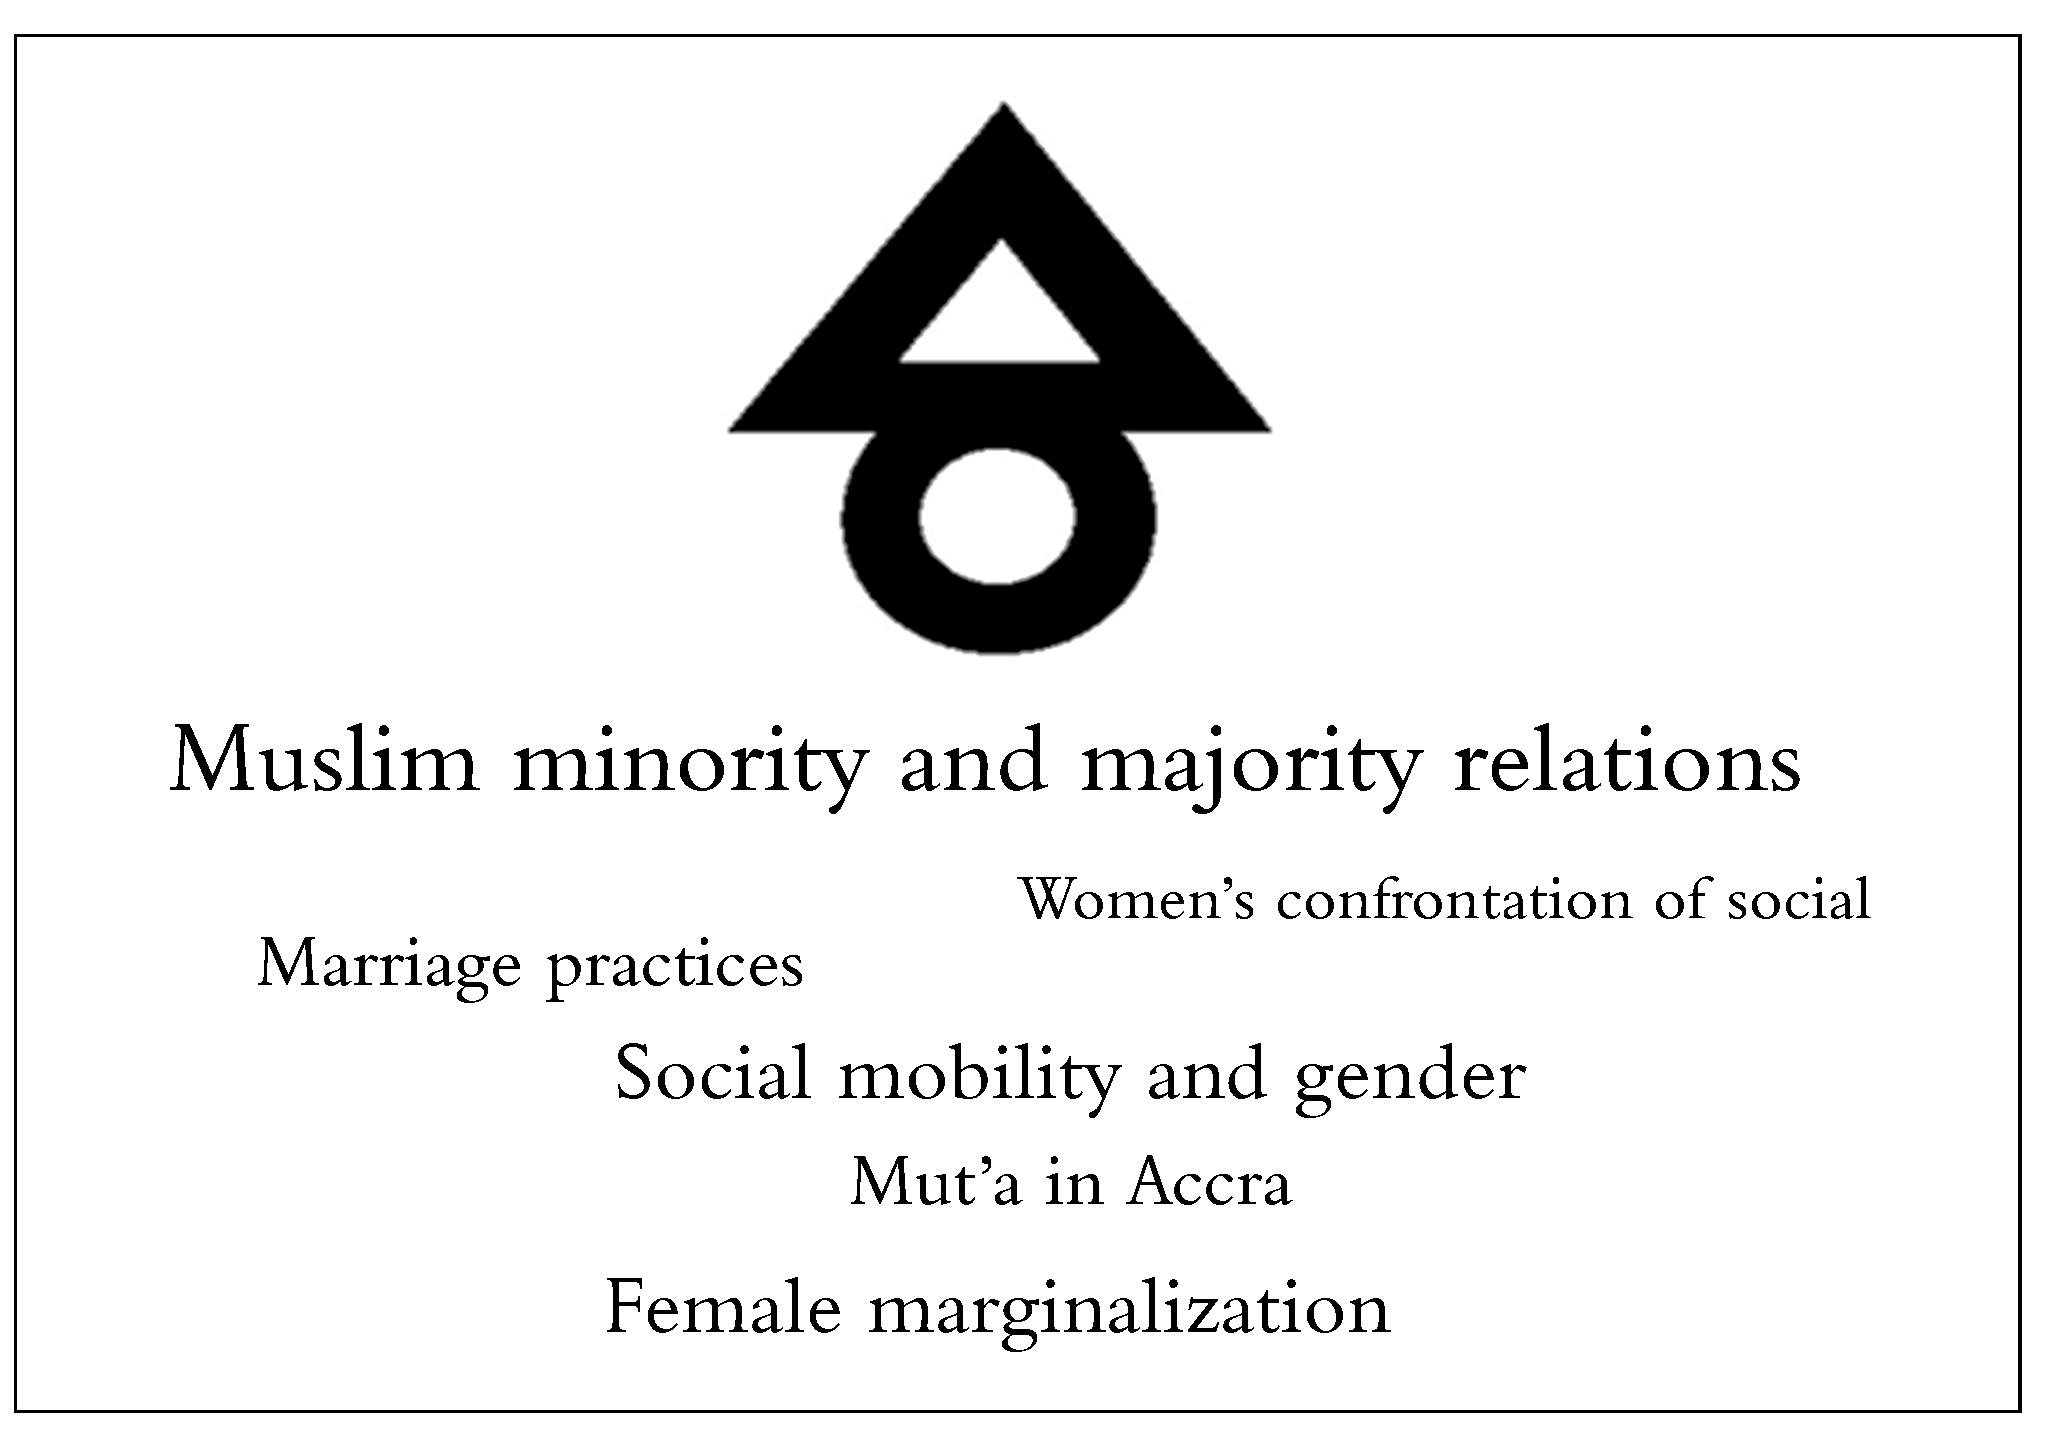 Muslim Marriages in Accra, Ghana: A Perspective on Minority/Majority Relations, Gender, and Social Mobility